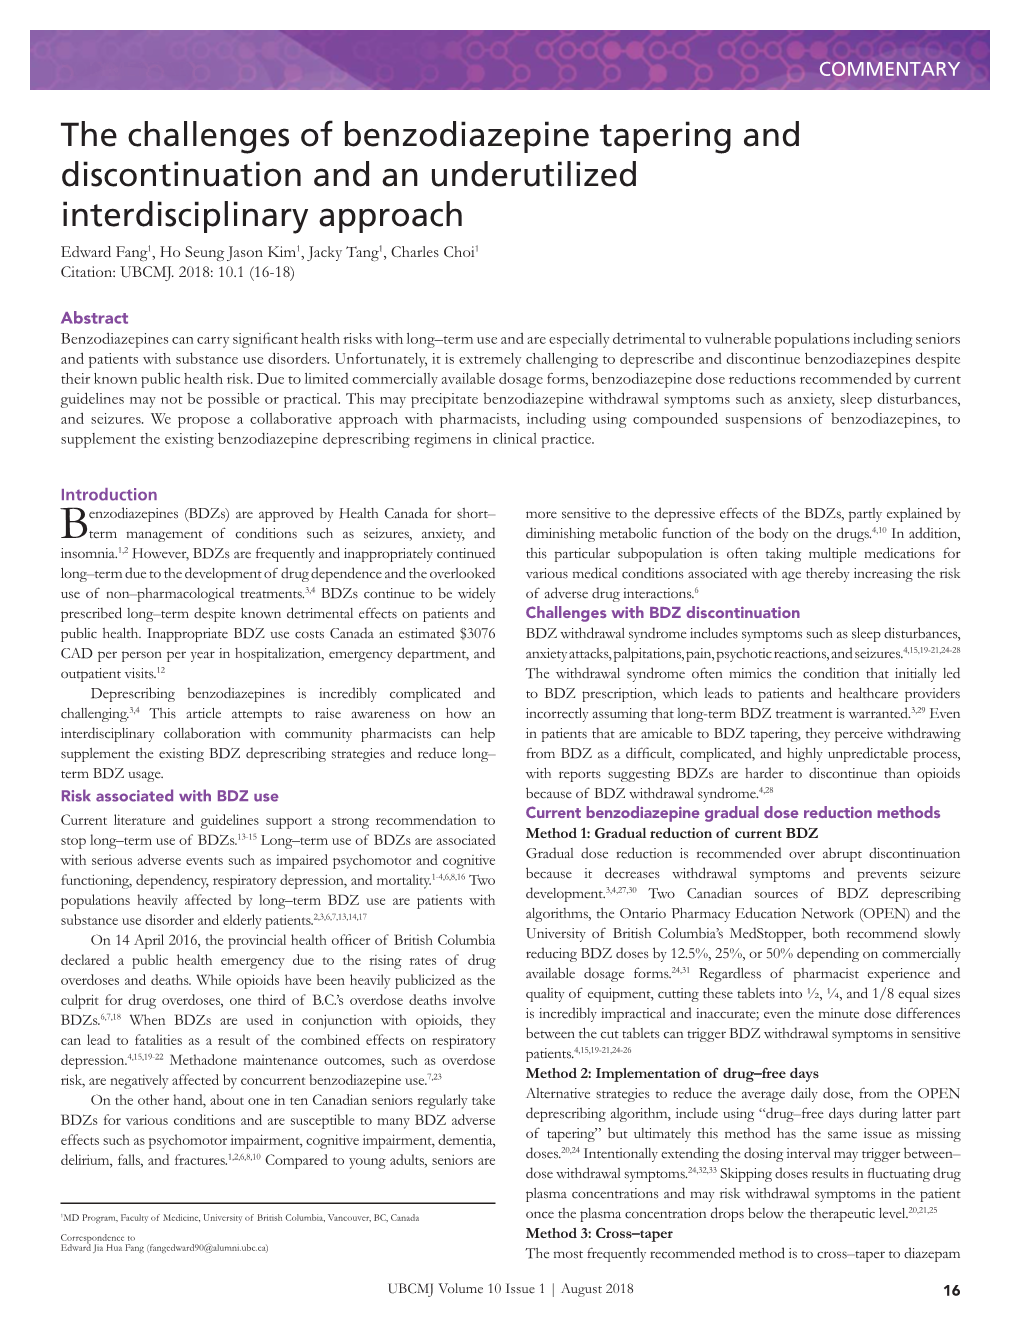 The Challenges of Benzodiazepine Tapering and Discontinuation And